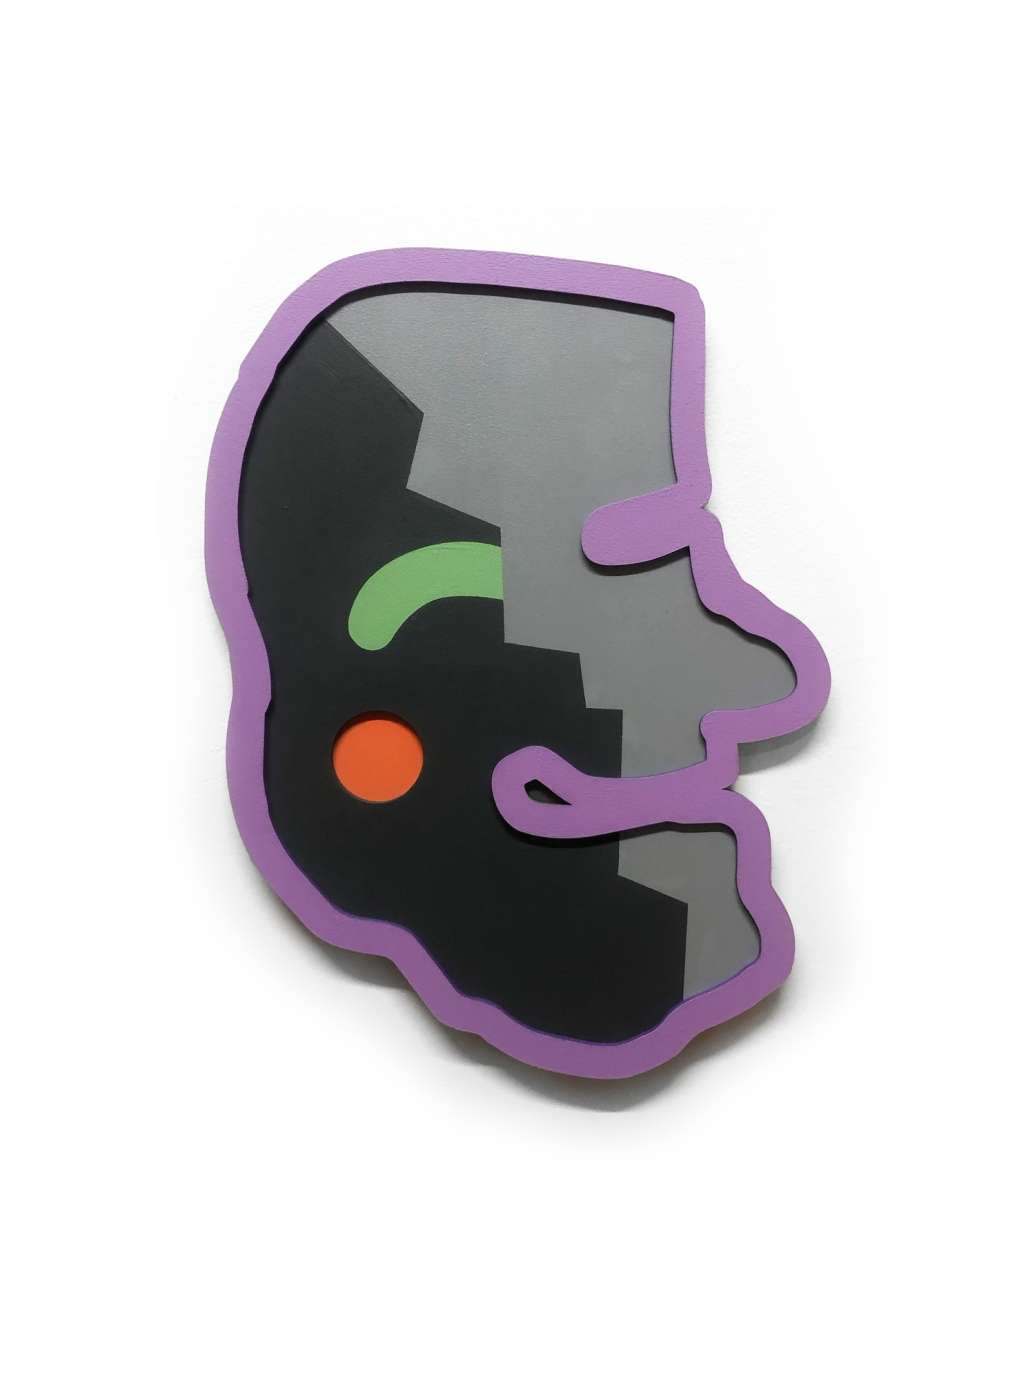 A 3D piece resembling the side of a face with purple outline and red, green, black, and gray details by Jerstin Crosby